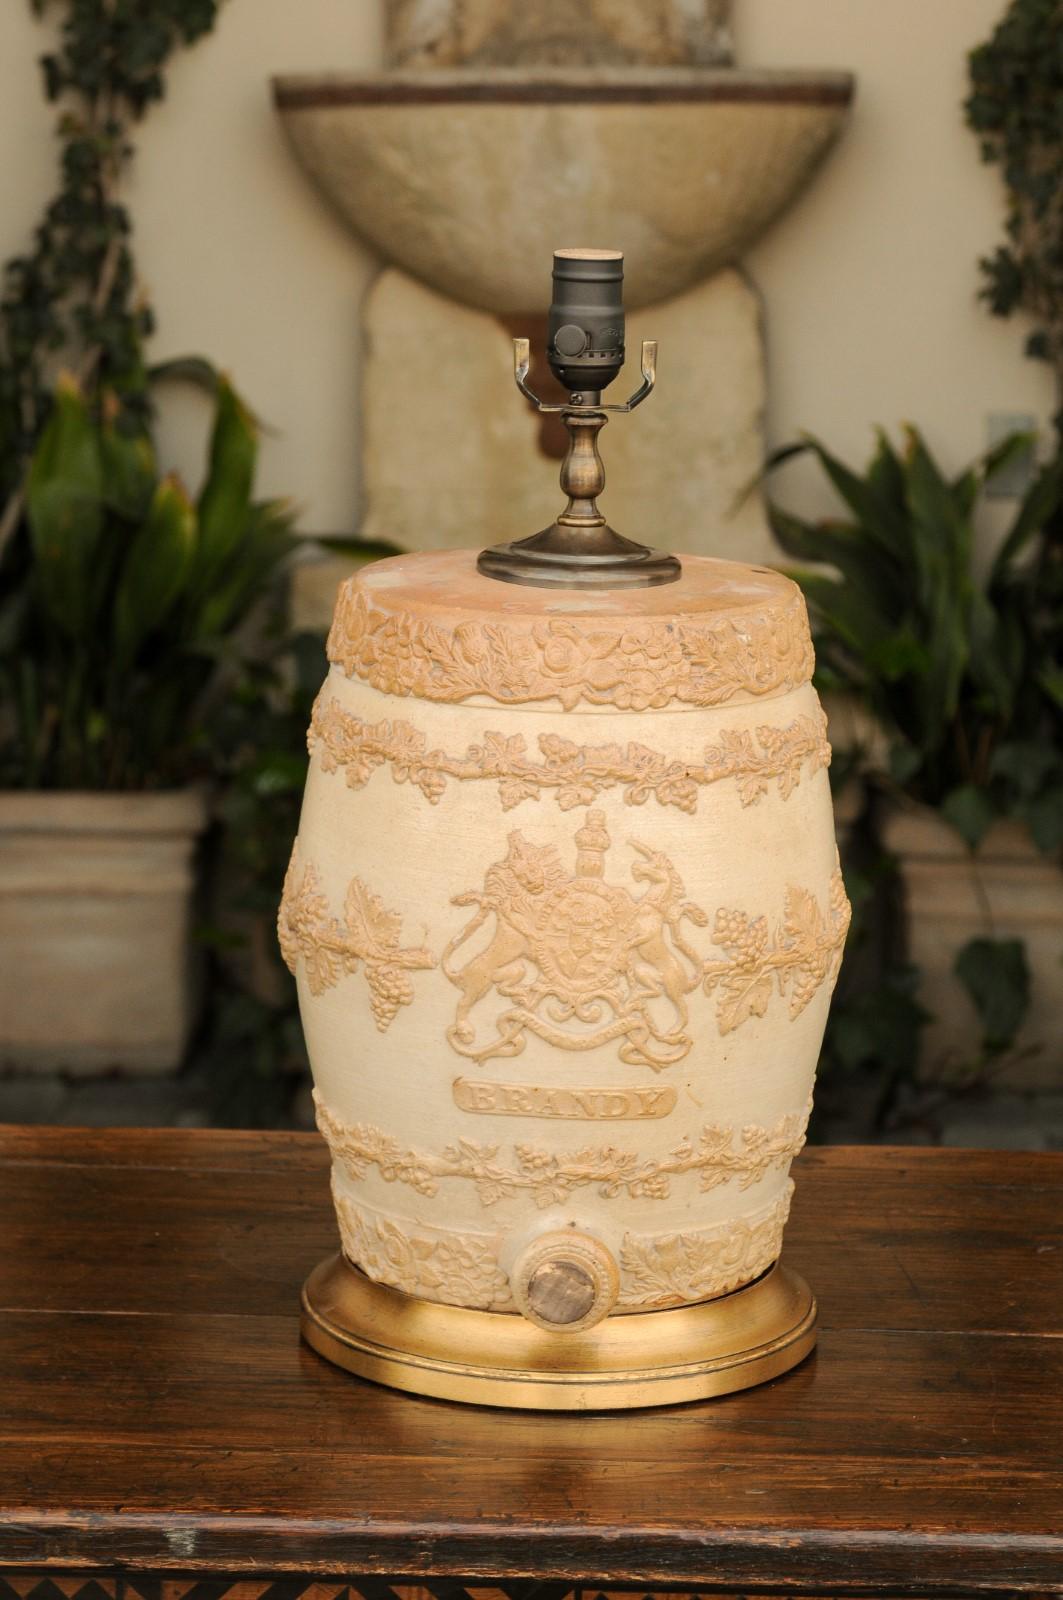 An English stoneware spirit barrel from the late 19th century, with the United Kingdom’s royal coat of arms and mounted as a table lamp. Born in England during the third quarter of the 19th century, this English stoneware spirit barrel has been